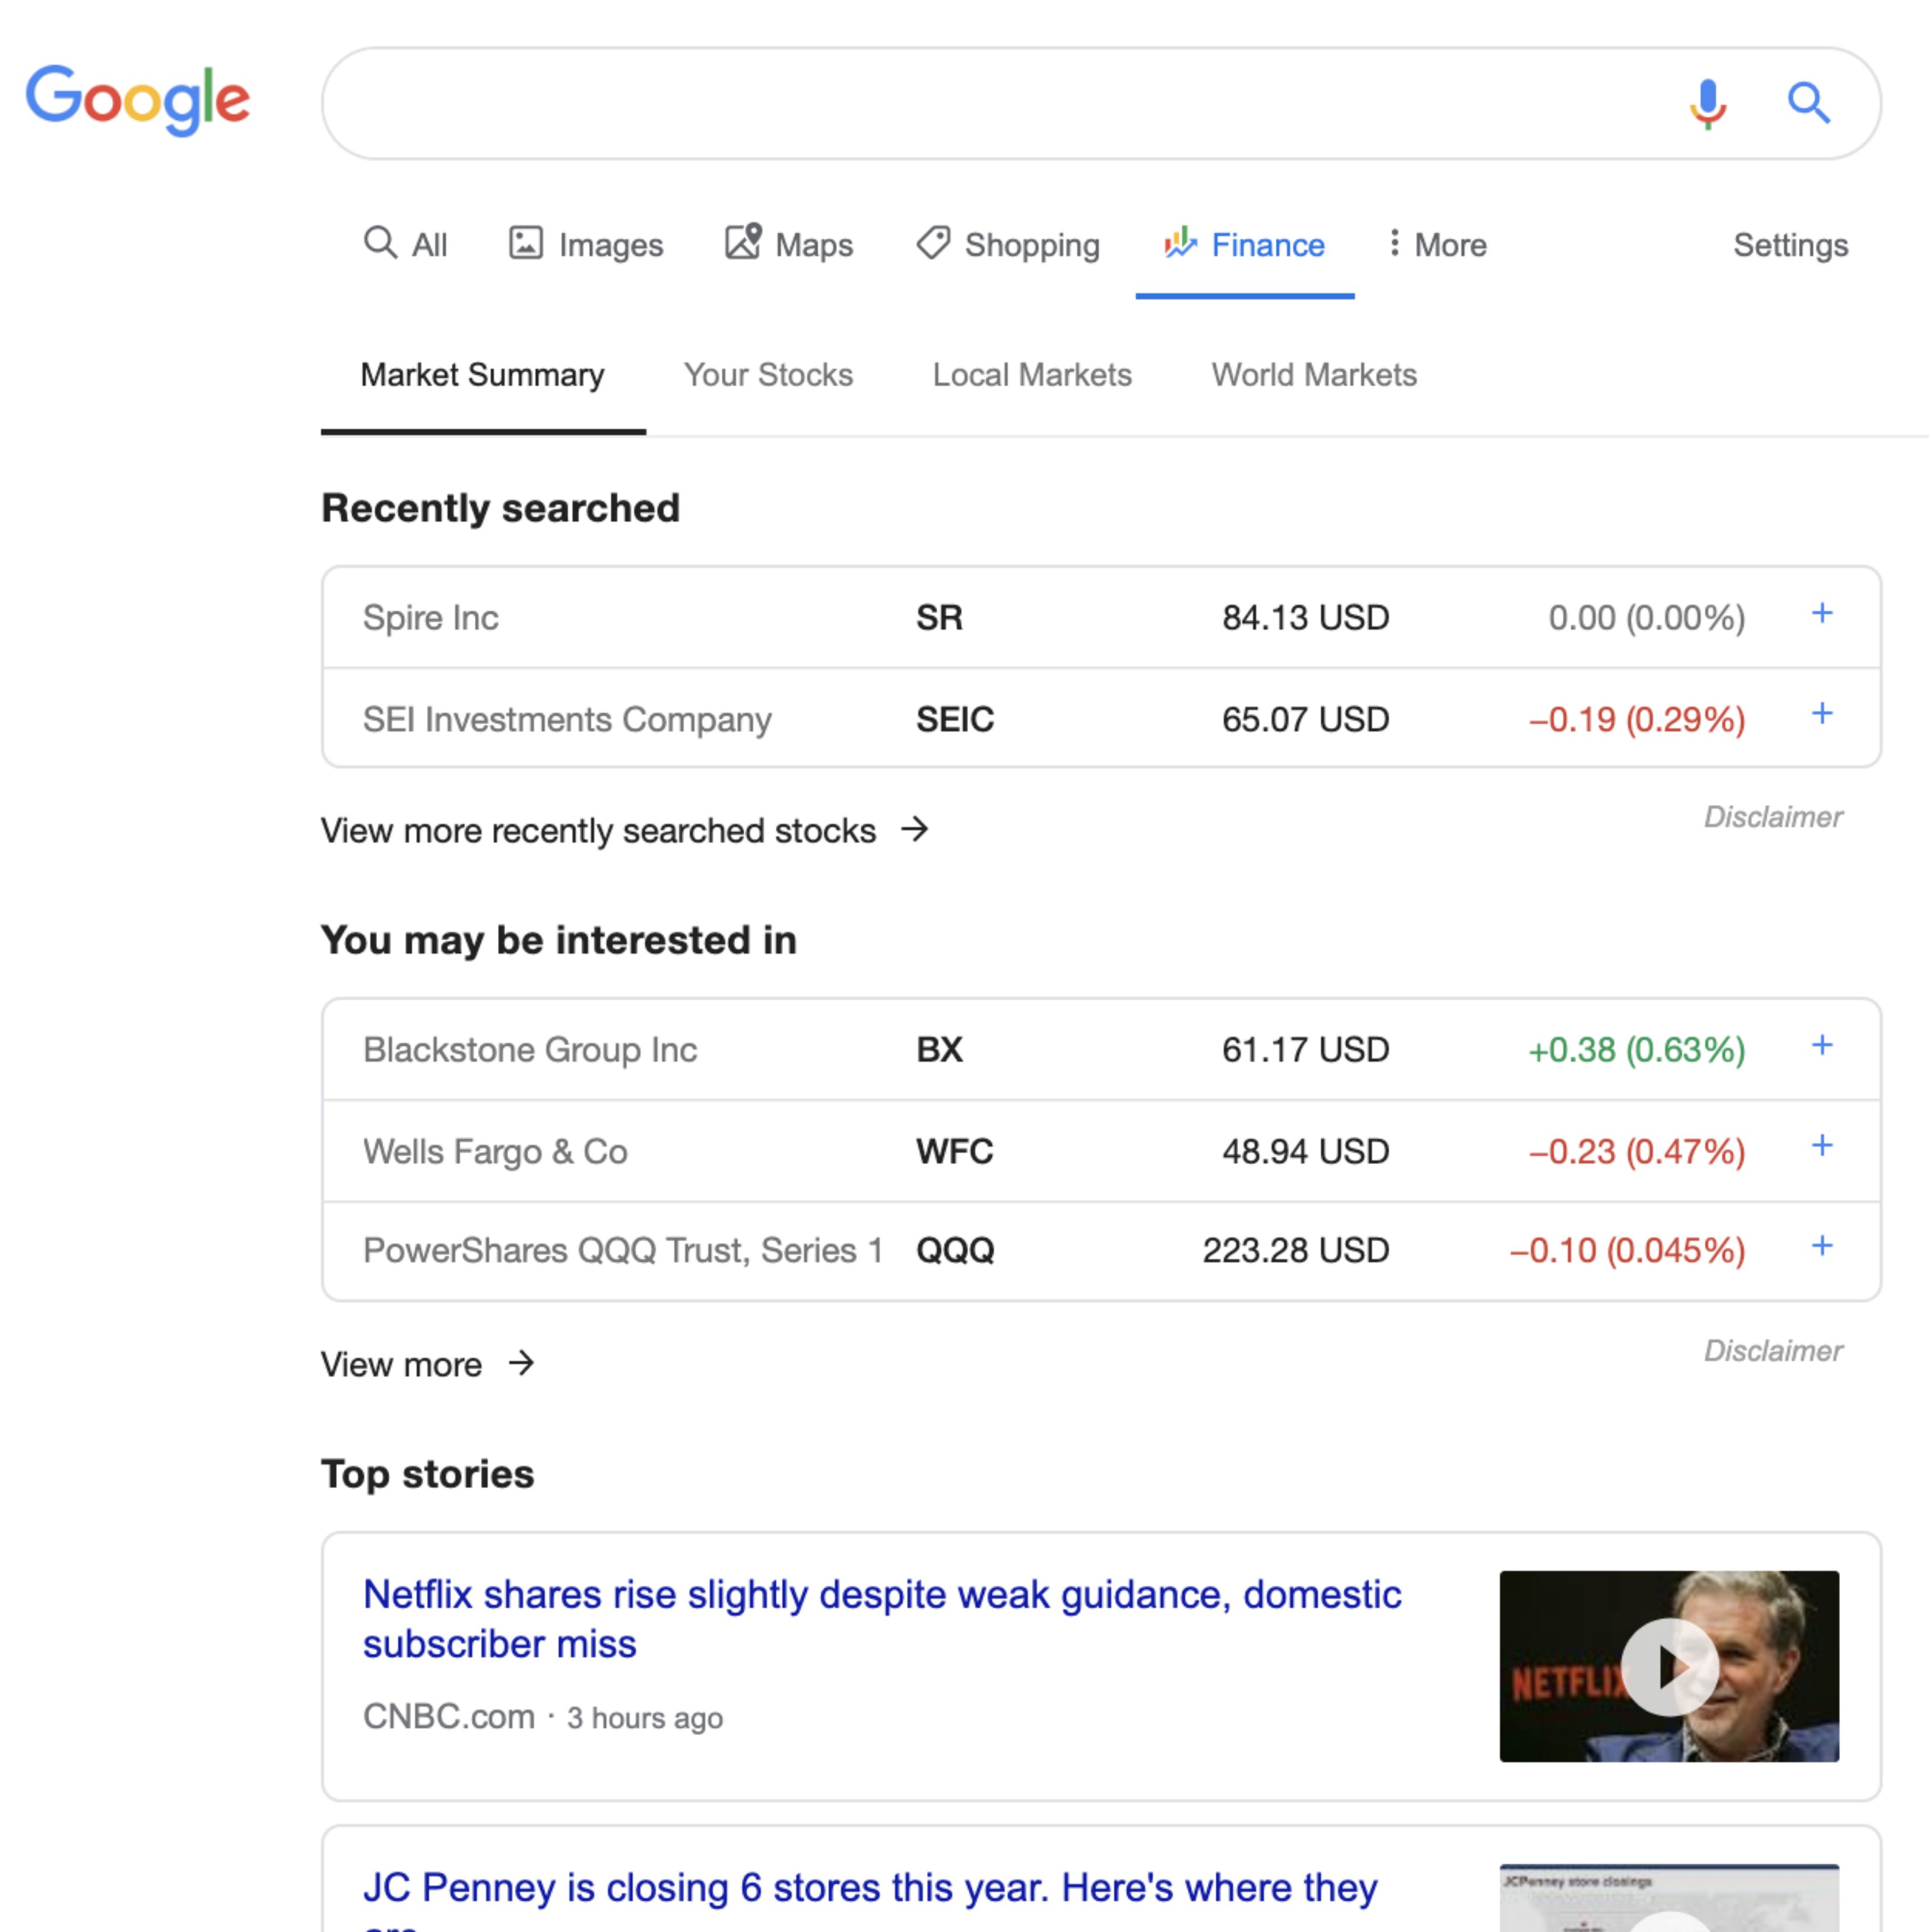 google_finance_research_company_performance_Find_companies_and_build_a_watch_list_step1.jpg